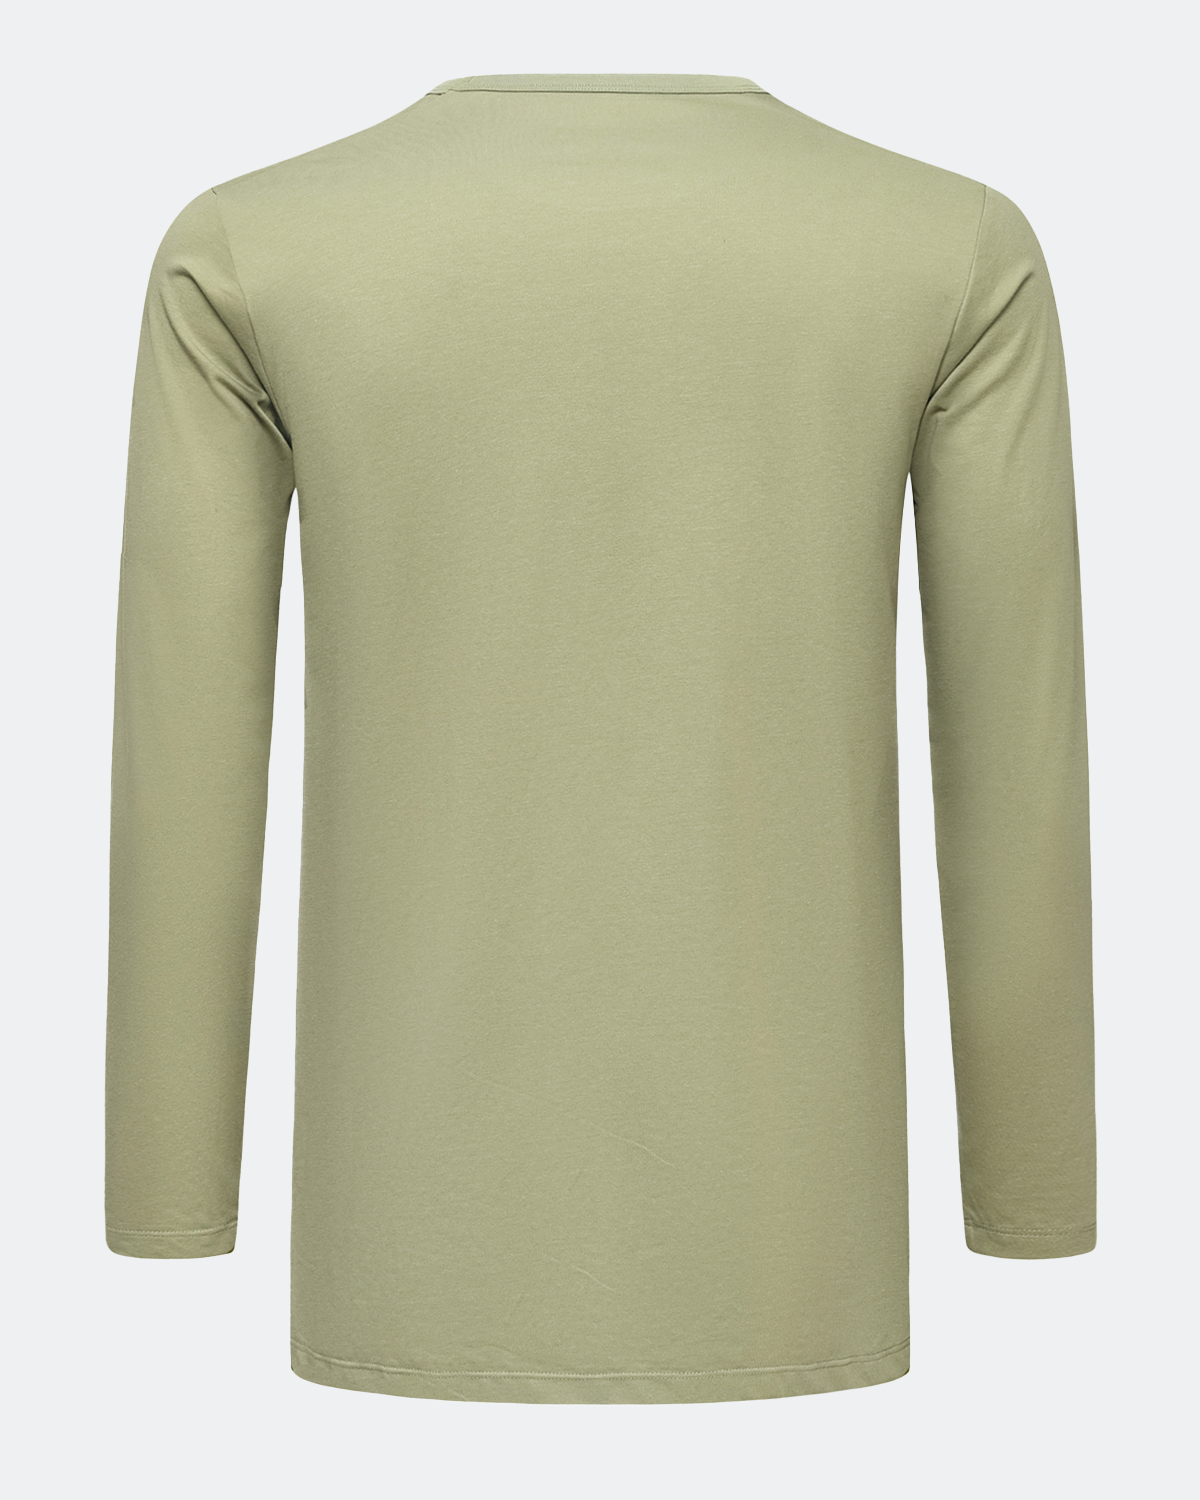 Spectacle 2.0 Sage Green Long Sleeve